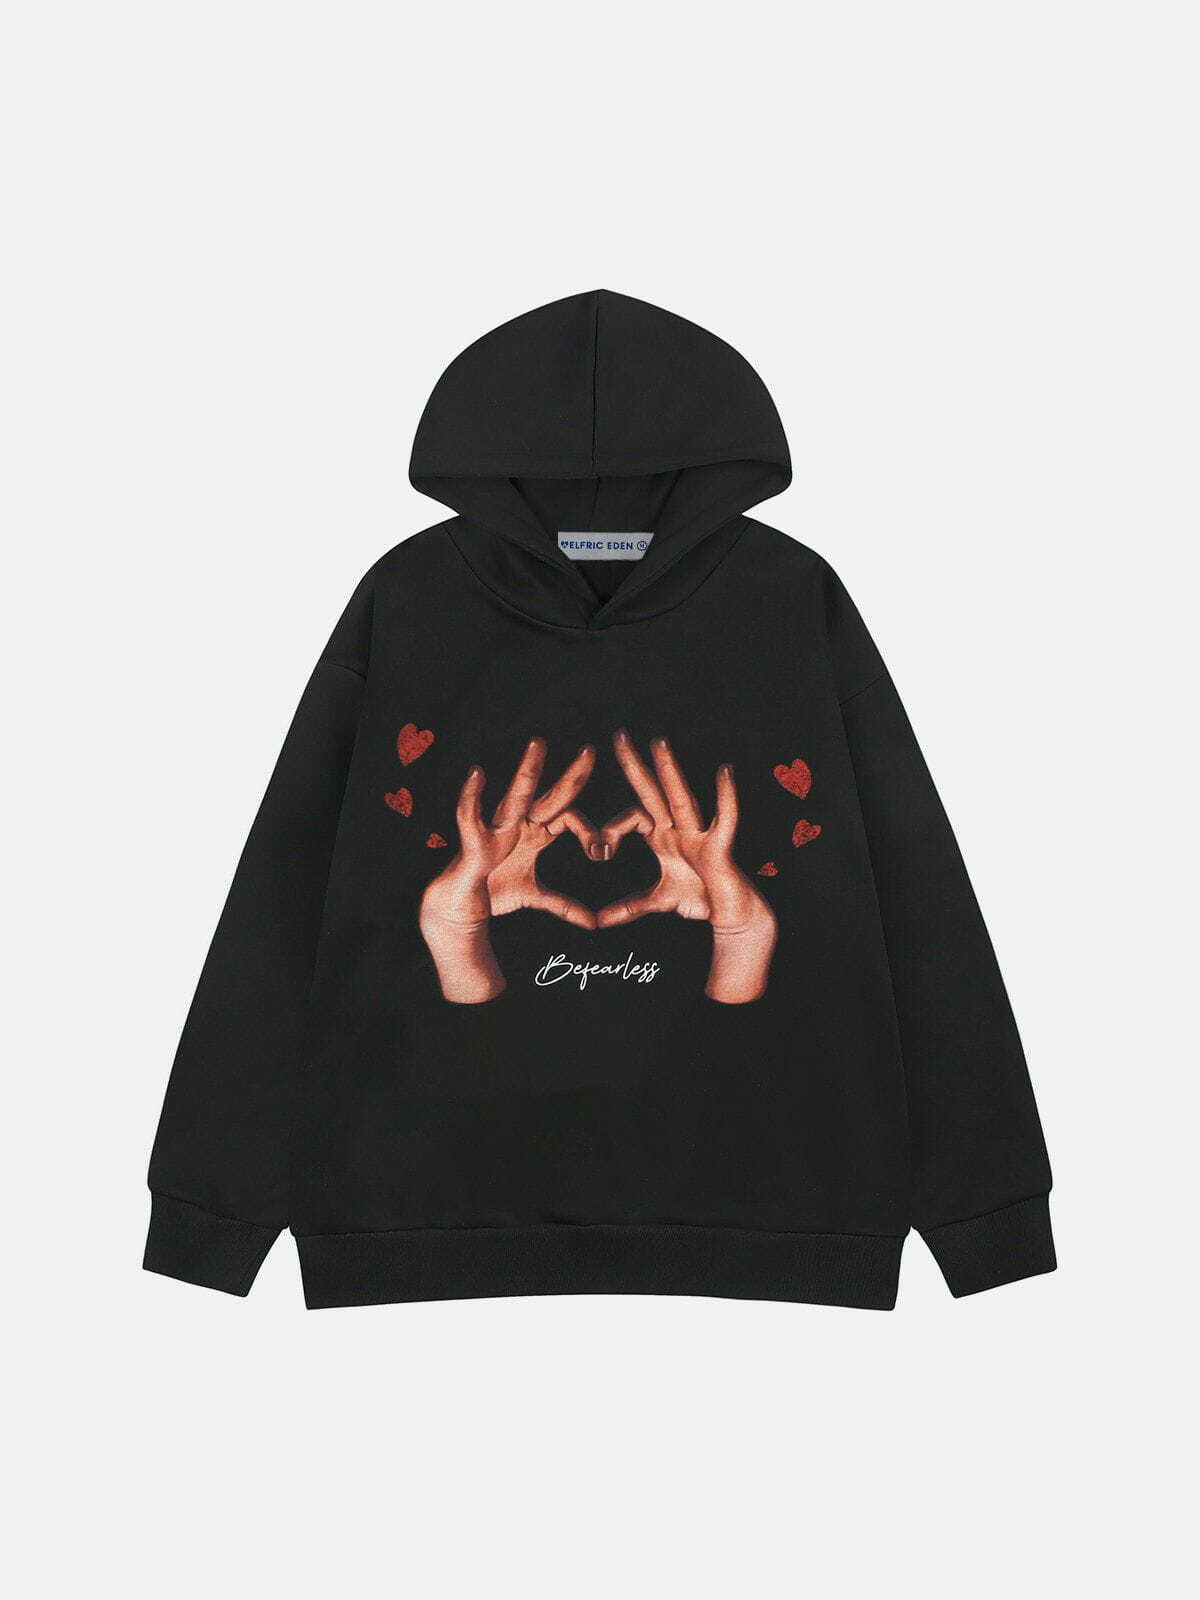 youthful finger love hoodie quirky & vibrant streetwear 7990